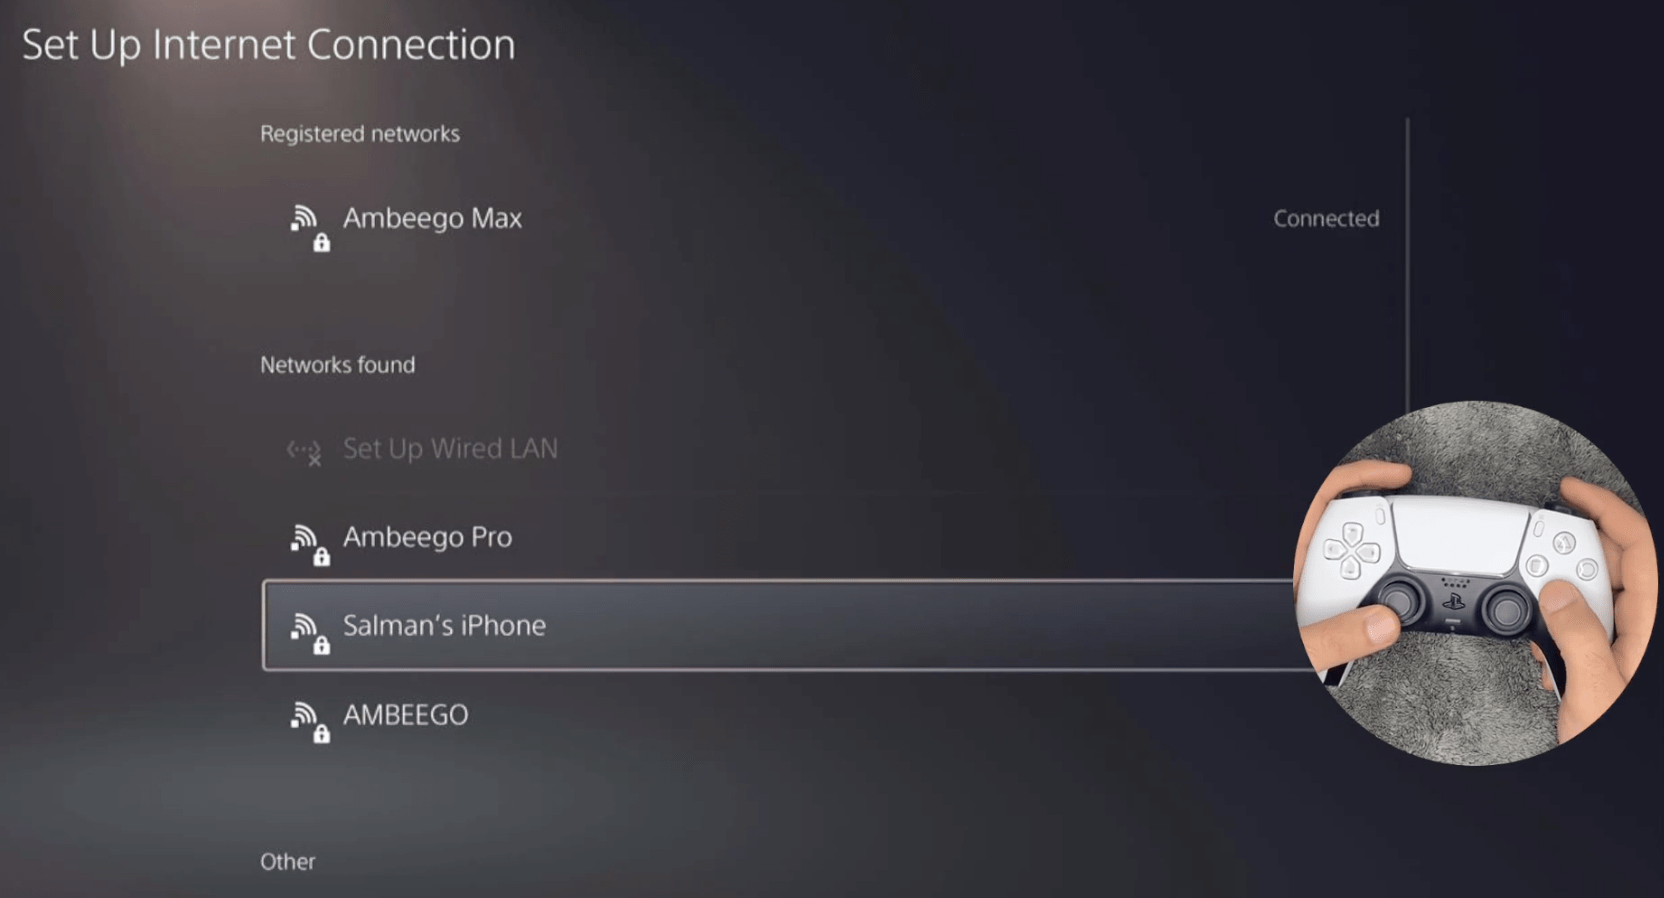 ps5 available list witha a selected wifi that is not yet connected